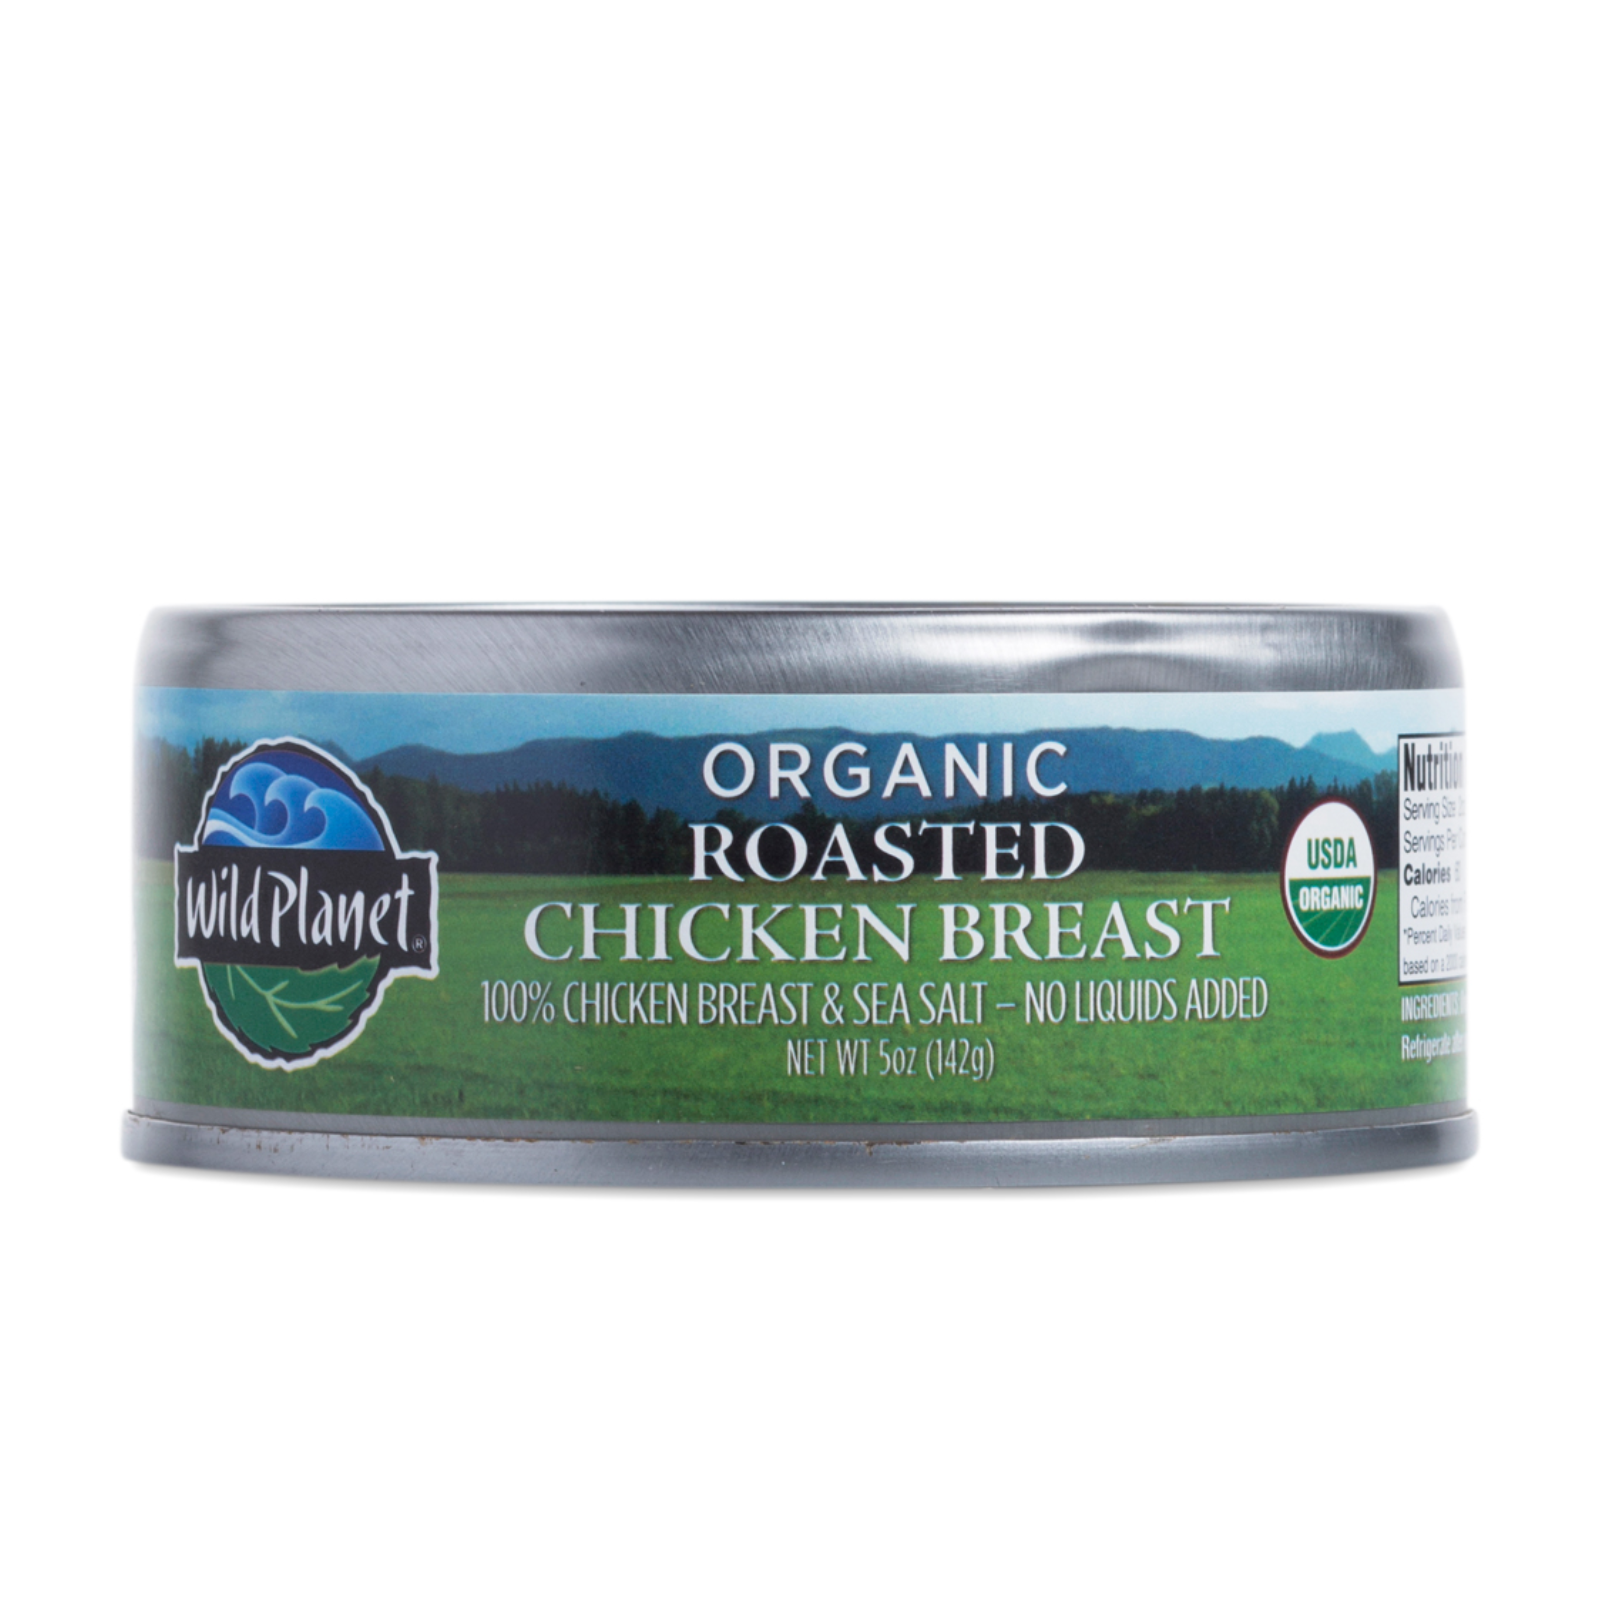 2-Pack Wild Planet Organic Roasted Chicken Breast 5oz can